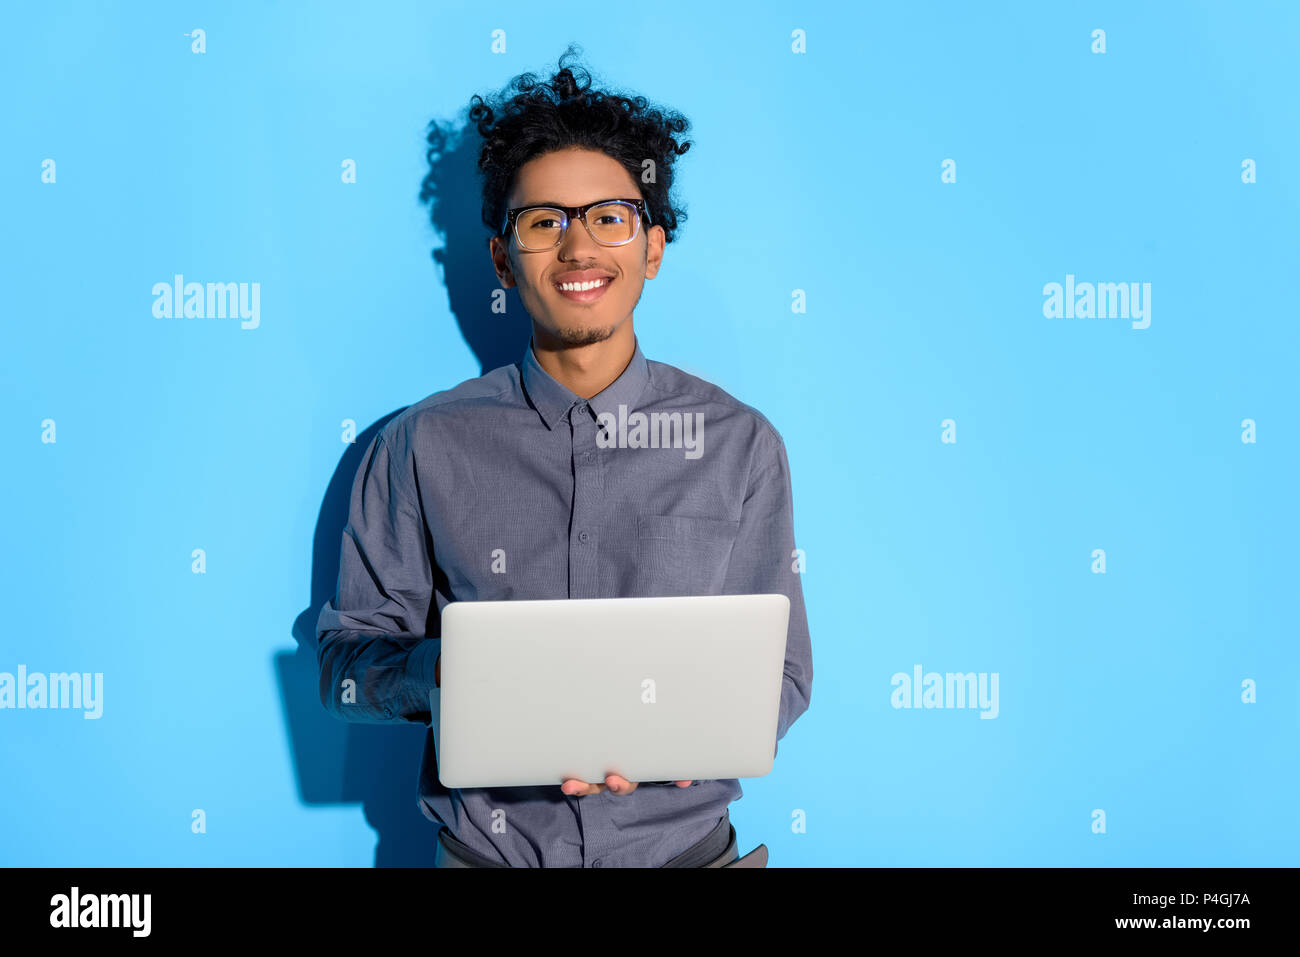 Young african amercian smiling man holding laptop on blue background Stock Photo